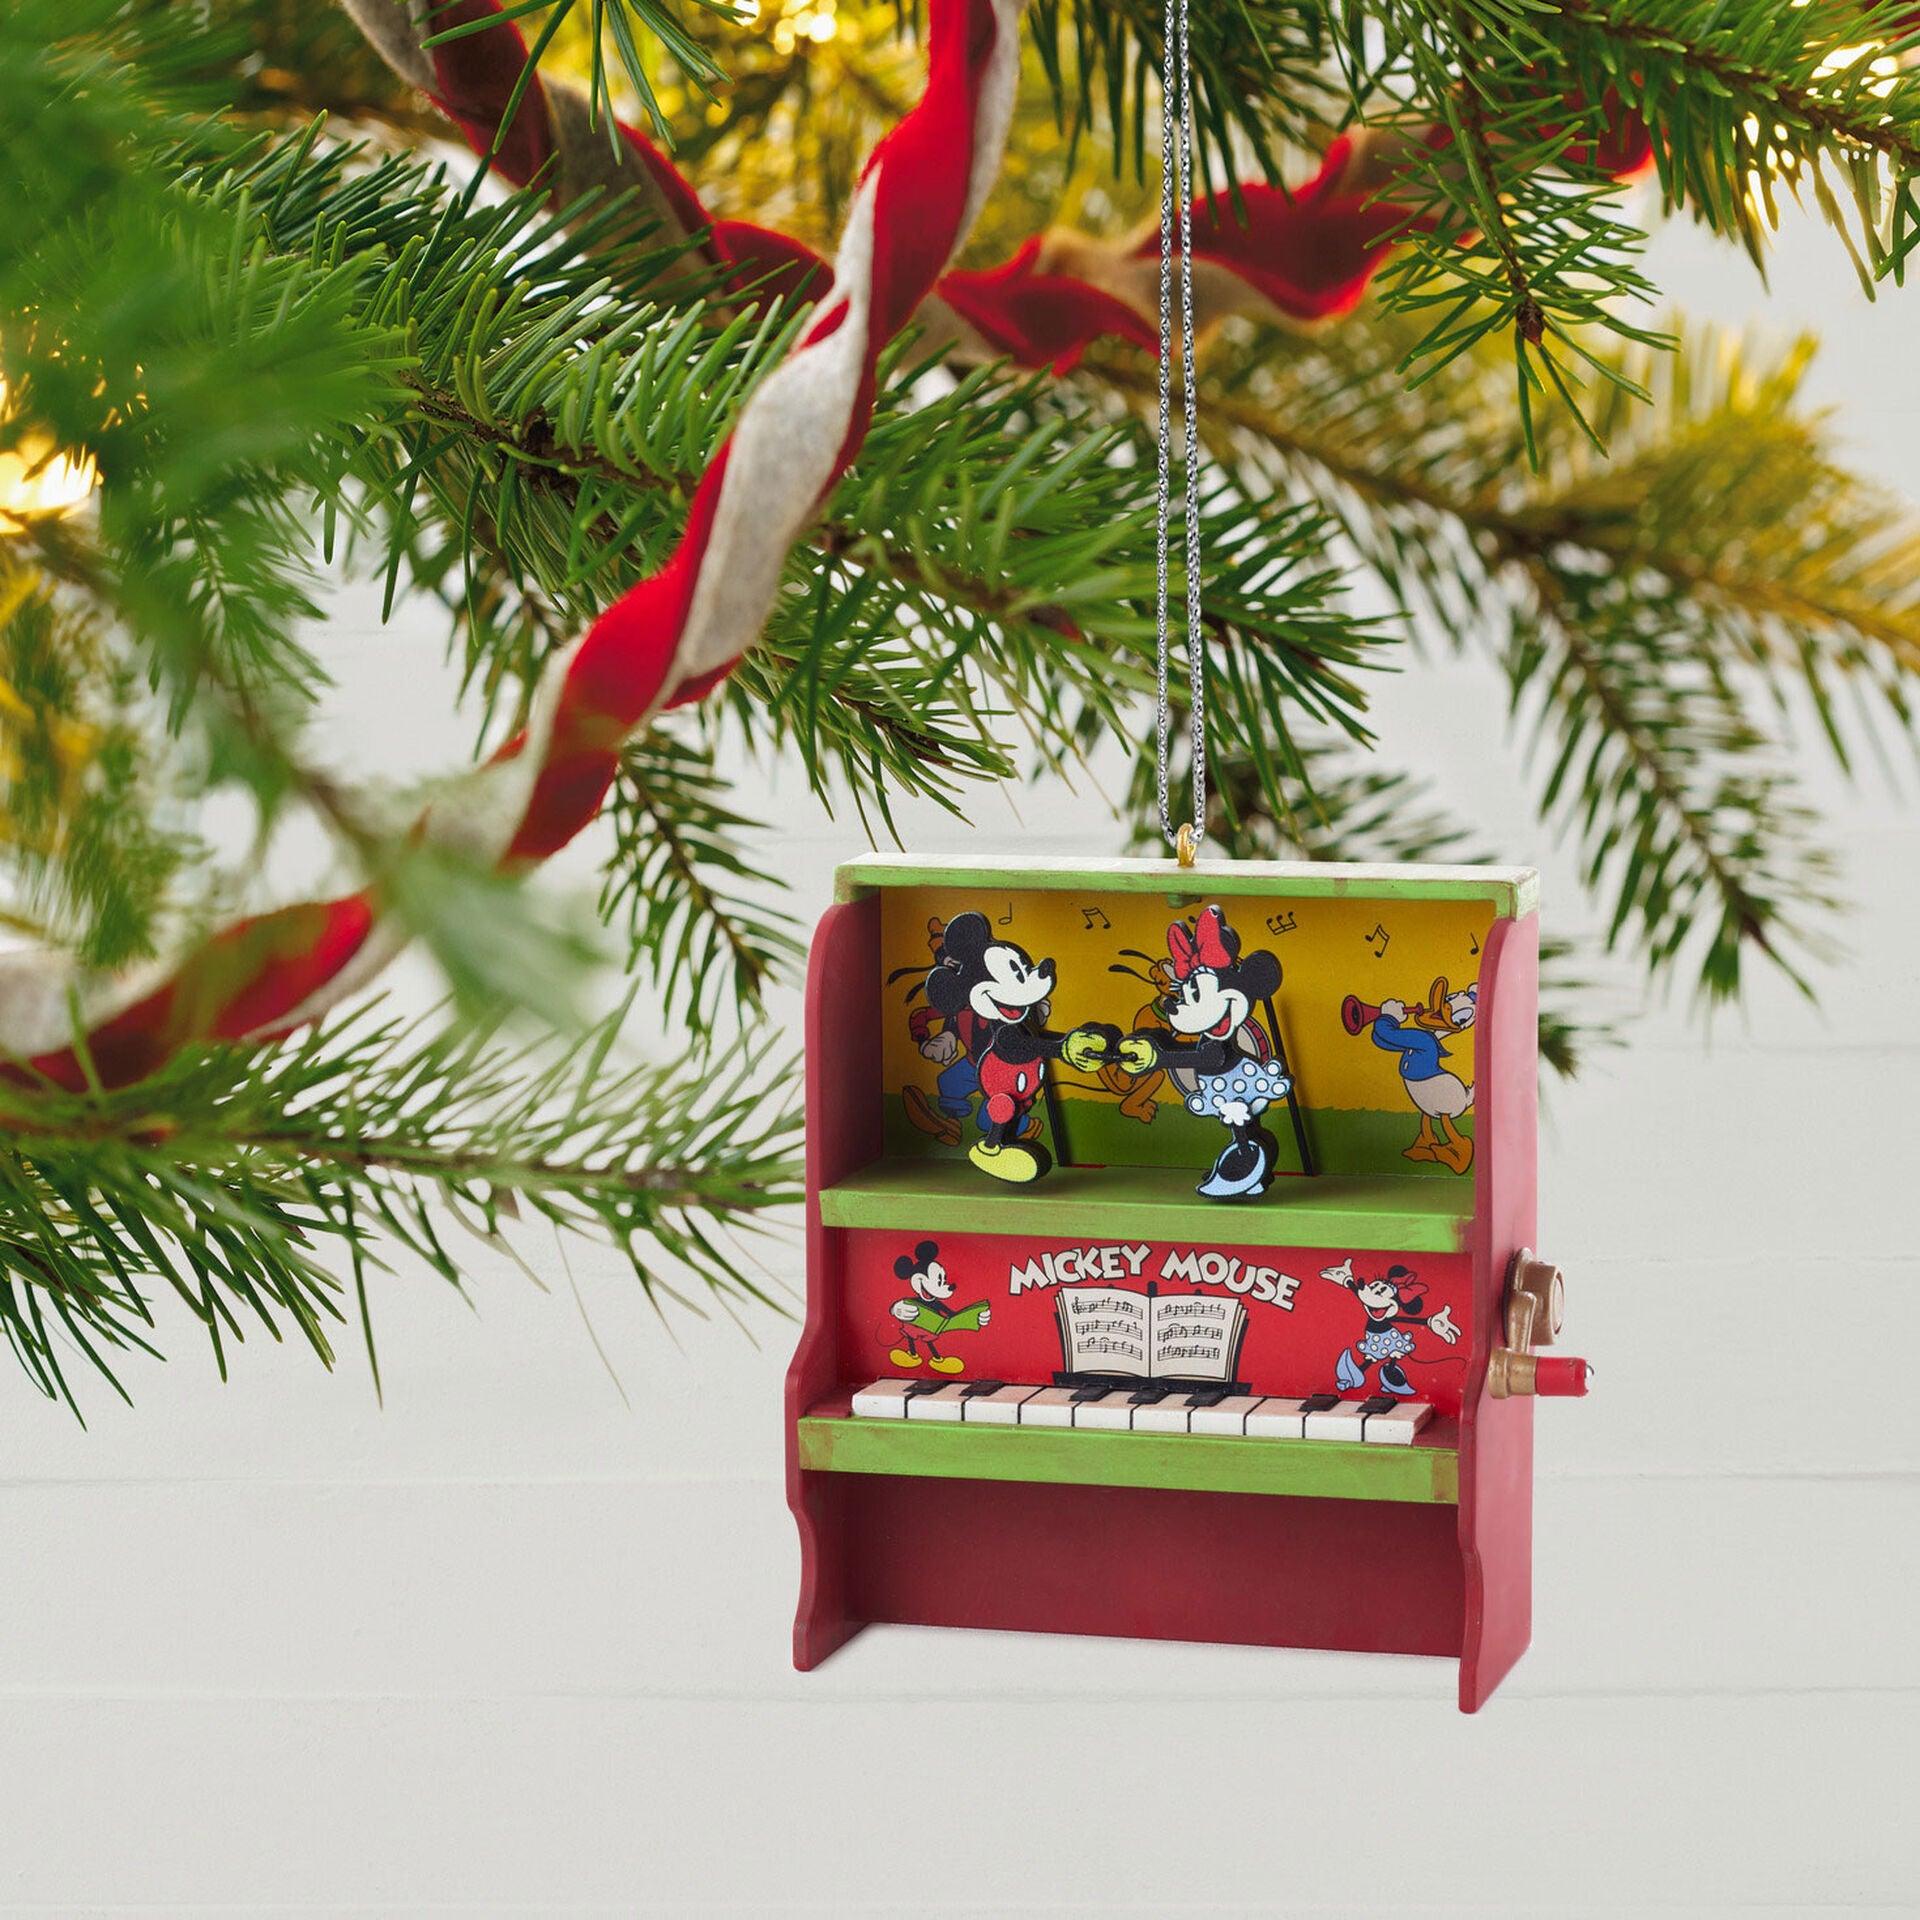 Disney Mickey and Minnie Let's Dance! Musical Ornament With Motion